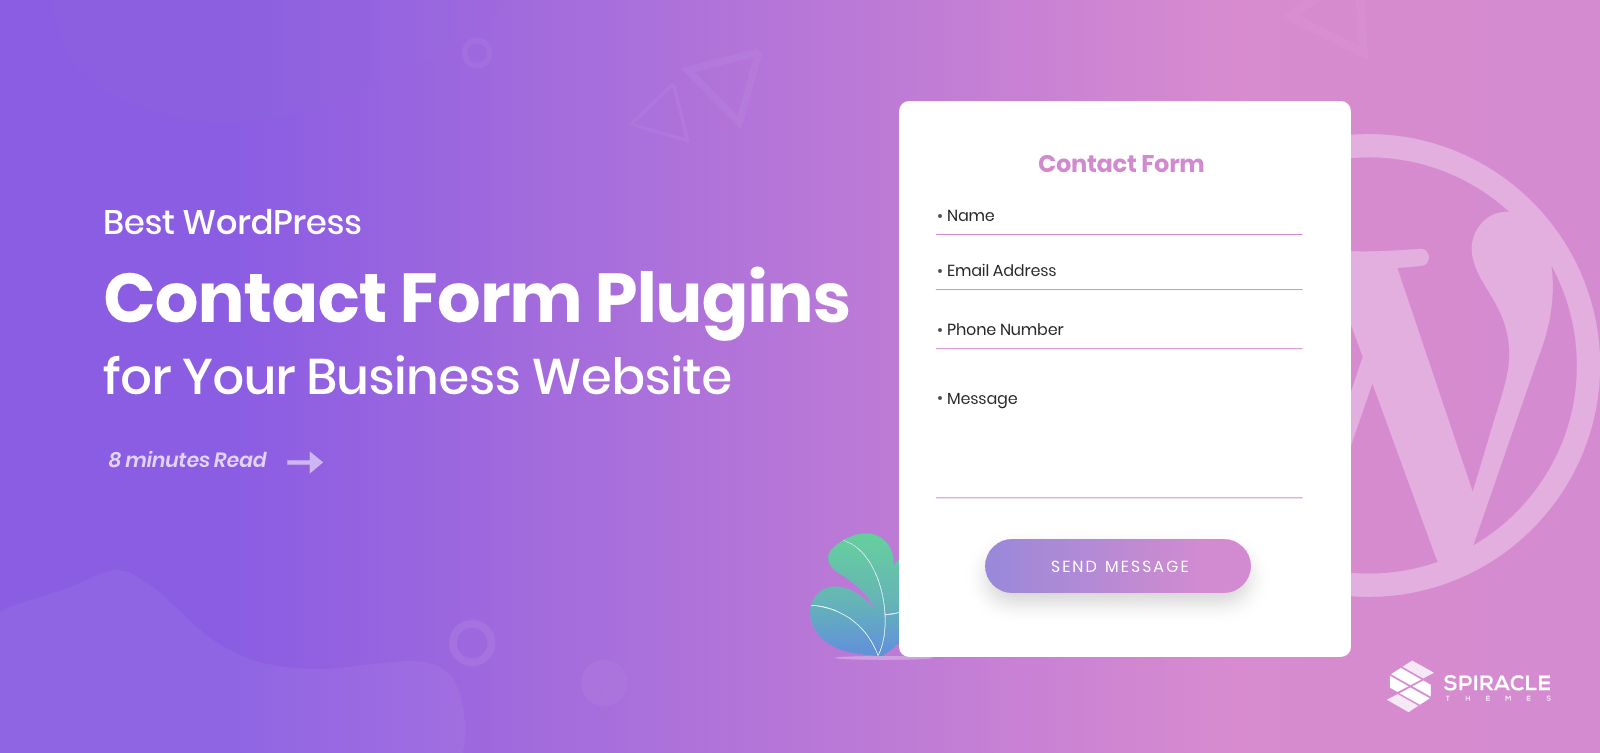 best-wordpress-contact-form-plugins-for-your-business-website